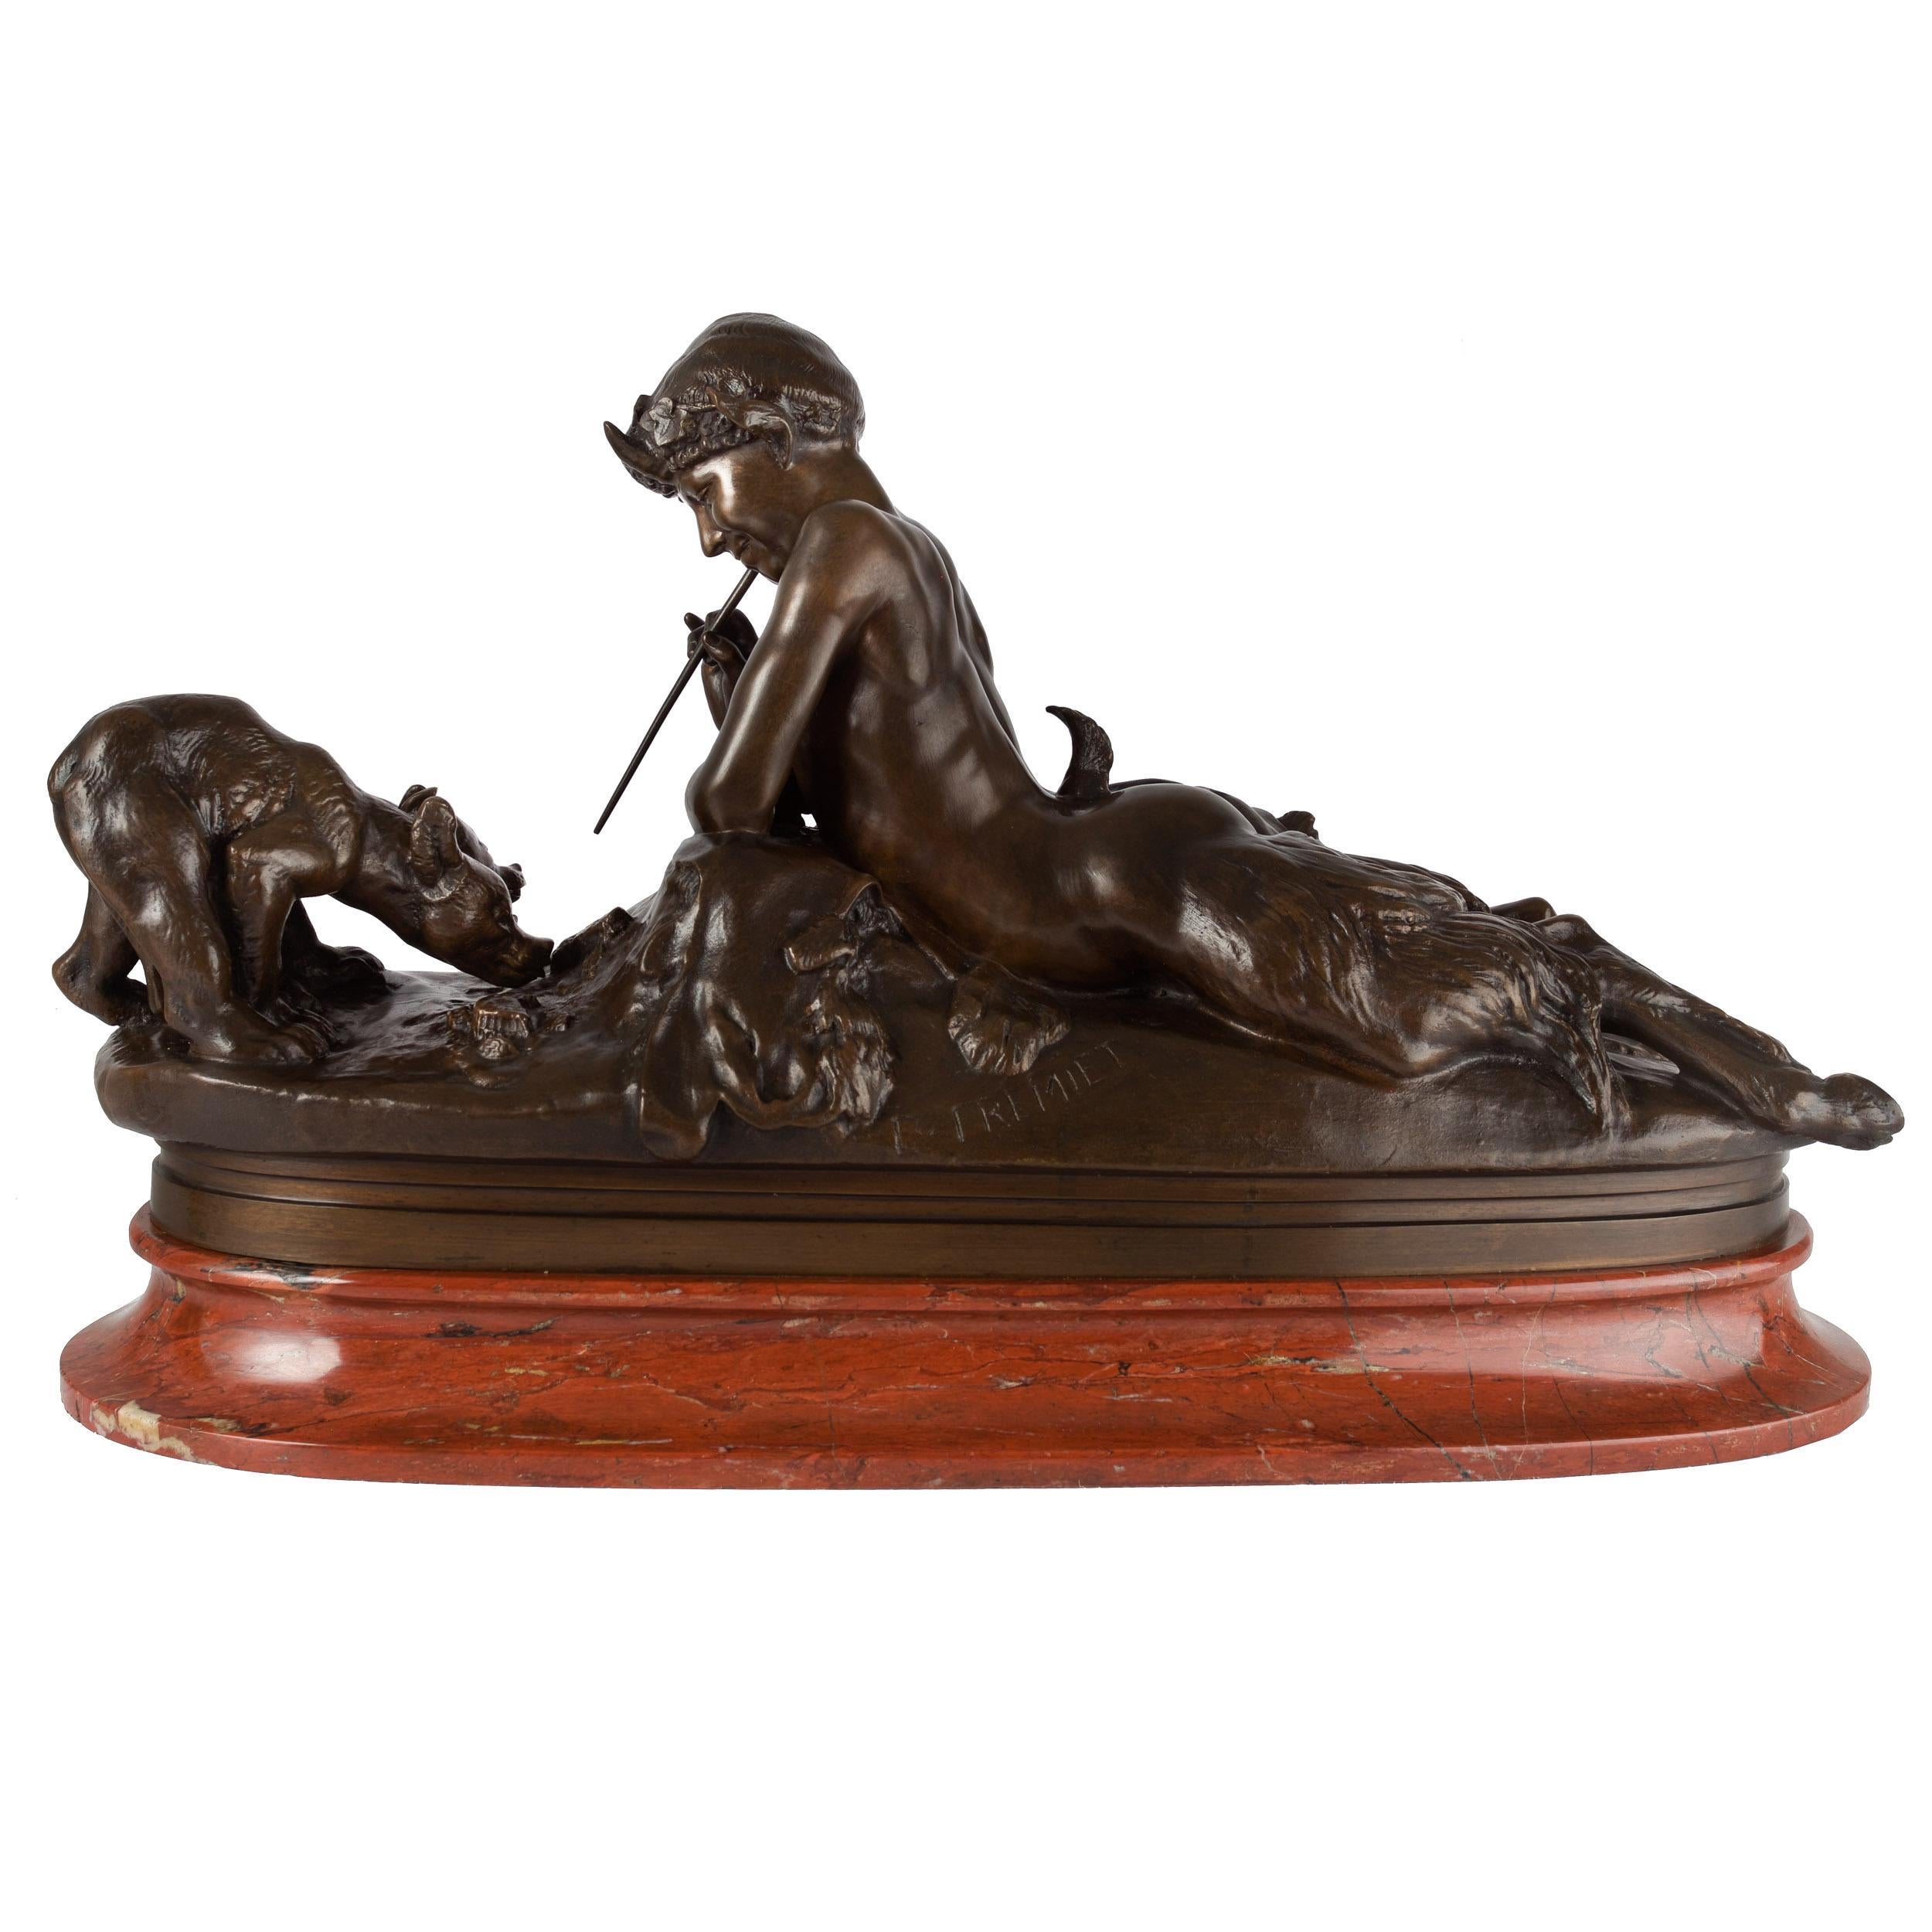 A very fine model of Pan et Oursons after the monumental original marble sculpture by Emmanuel Fremiet, it depicts the young satyr Pan resting over a naturalistic base at total ease with the nature surrounding him; in his hand he grasps a thin stick